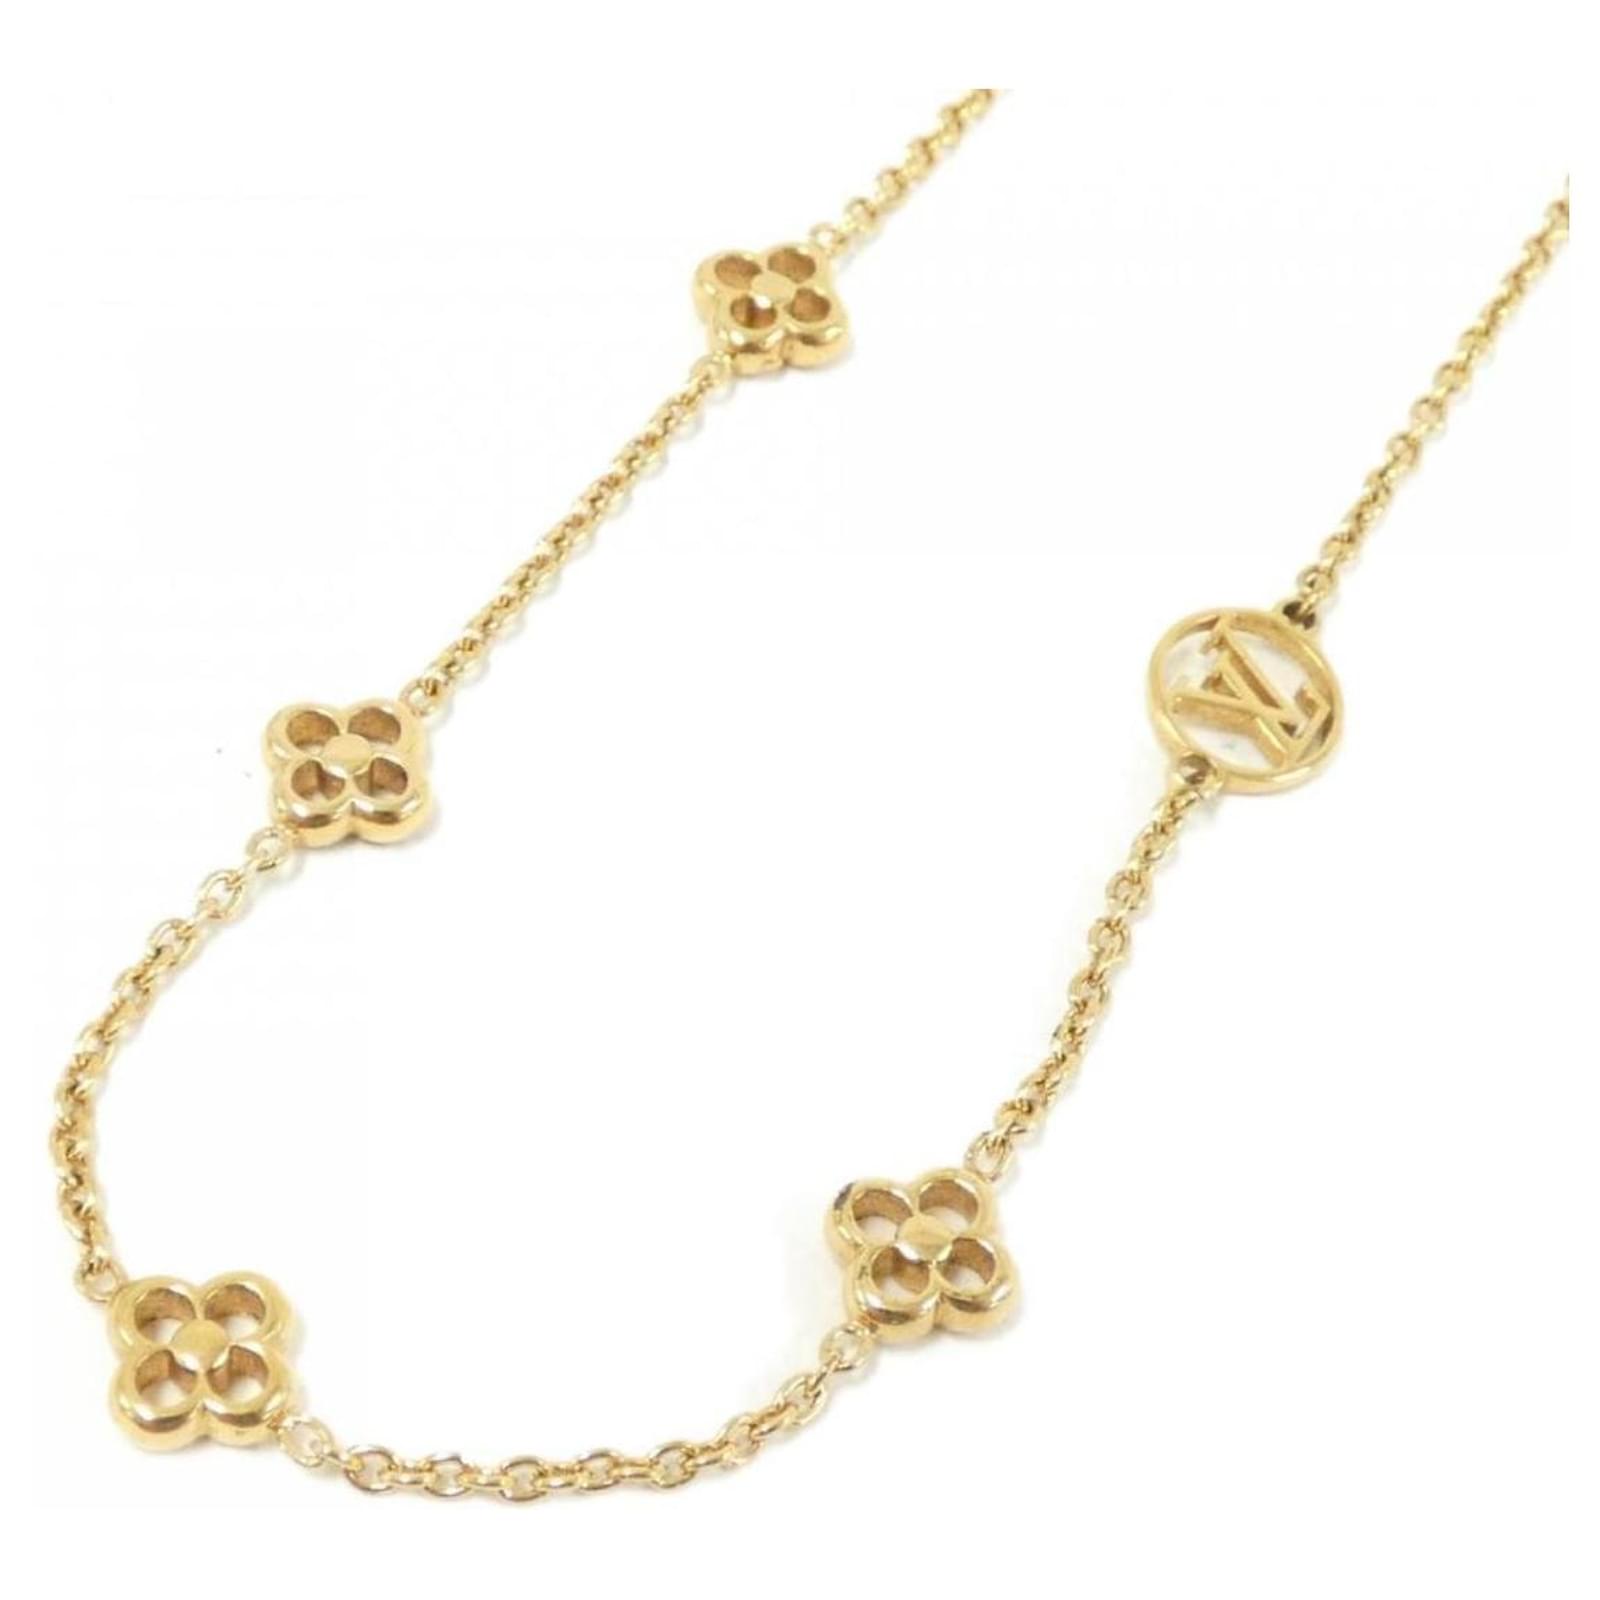 LOUIS VUITTON LOUIS VUITTON Flower full;M68125 Necklace Gold Plated Used LV  women M68125